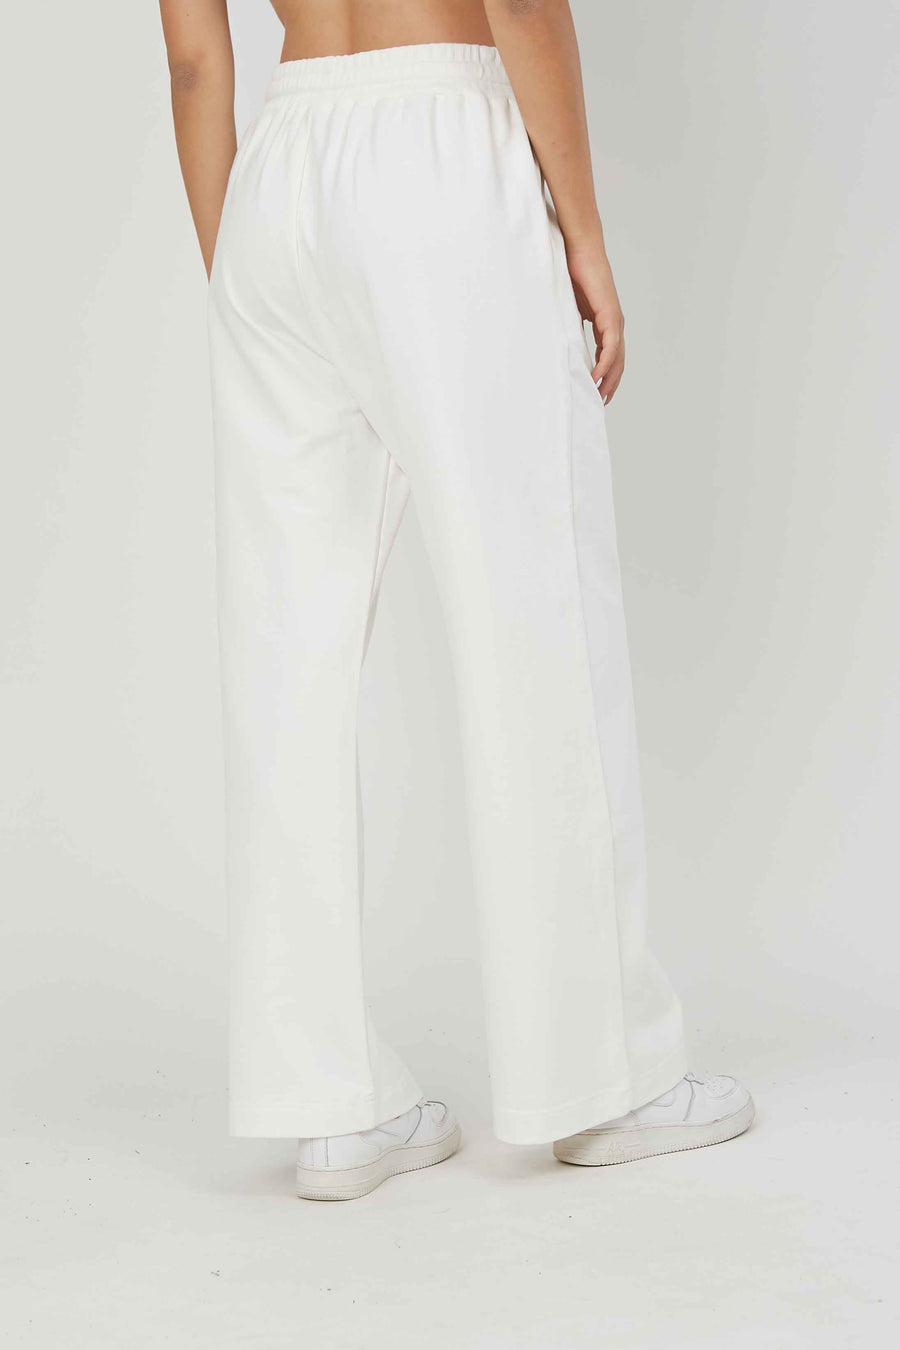 JUST BEFORE COUTURE OFF WHITE SWEATSHIP PANTS